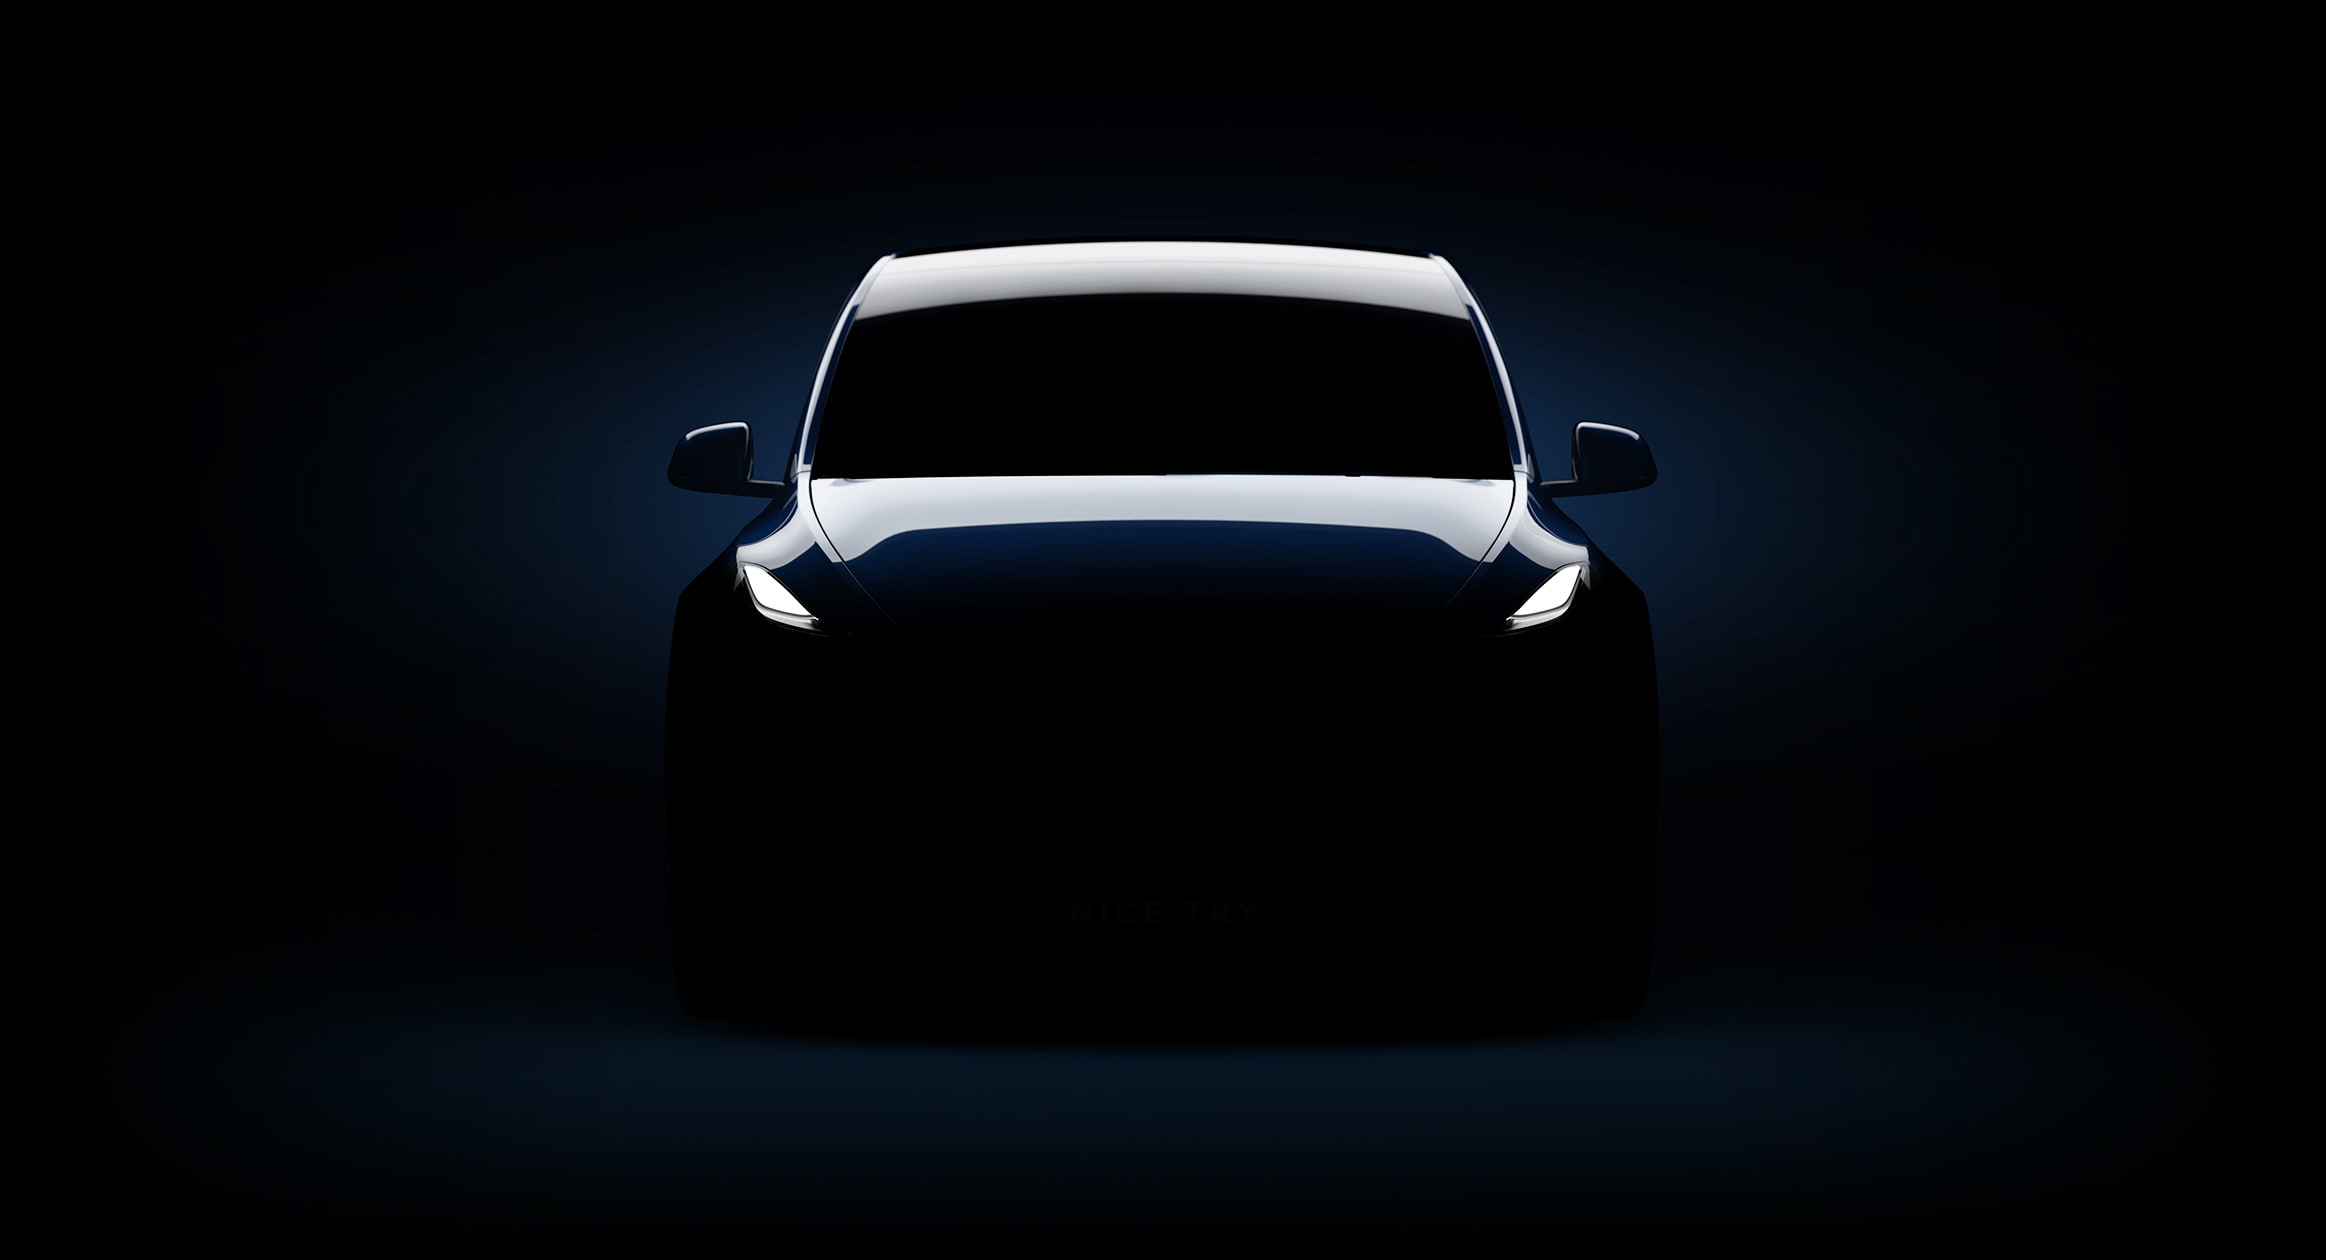 Almost Here: Tesla Teases The Model Y Before Thursday's Official Reveal